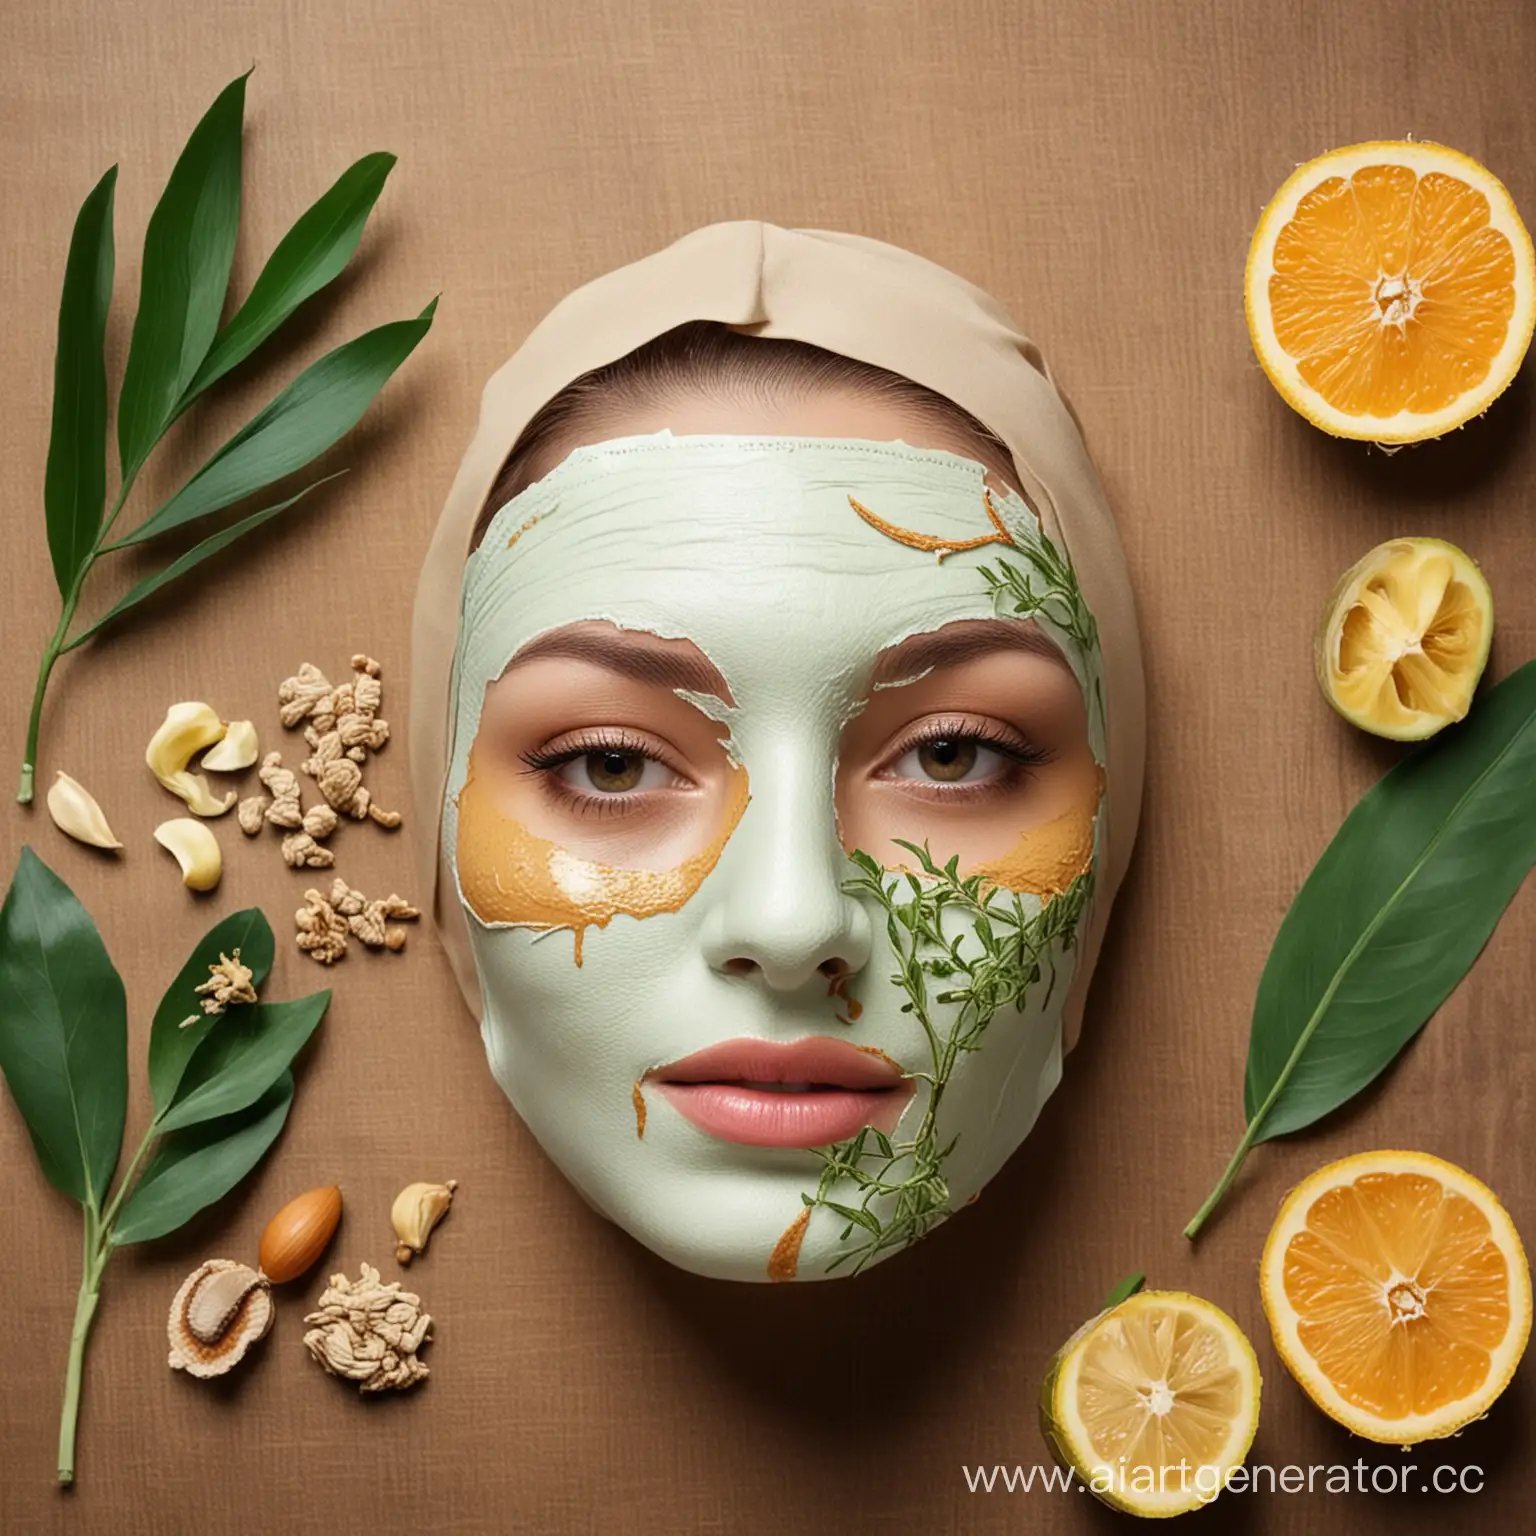 Masks made from natural ingredients skin care
